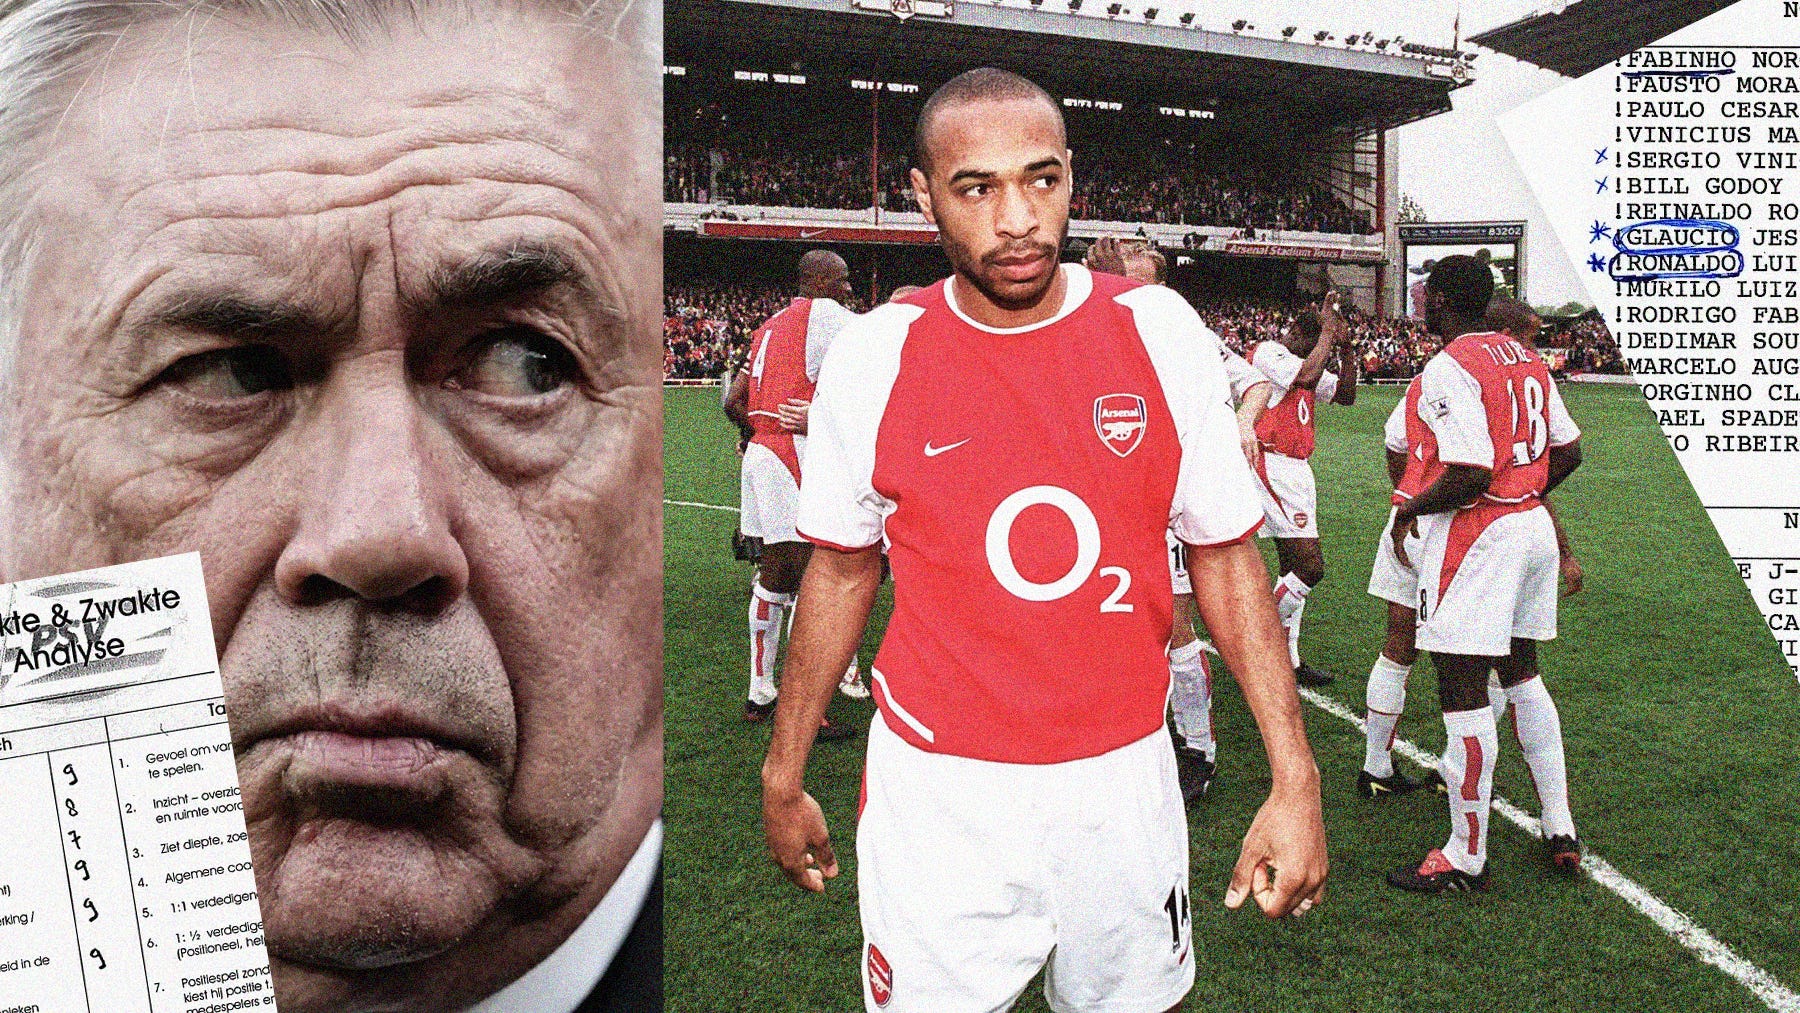 A composite image featuring a close-up photo of Carlo Ancelotti with his eyebrow raised and a wide-frame photo of Thierry Henry at Highbury in the 2003/04 season with the Arsenal squad behind him; overlayed onto it are clippings of Piet de Visser's scout reports on Ronaldo Nazário and Ronaldinho